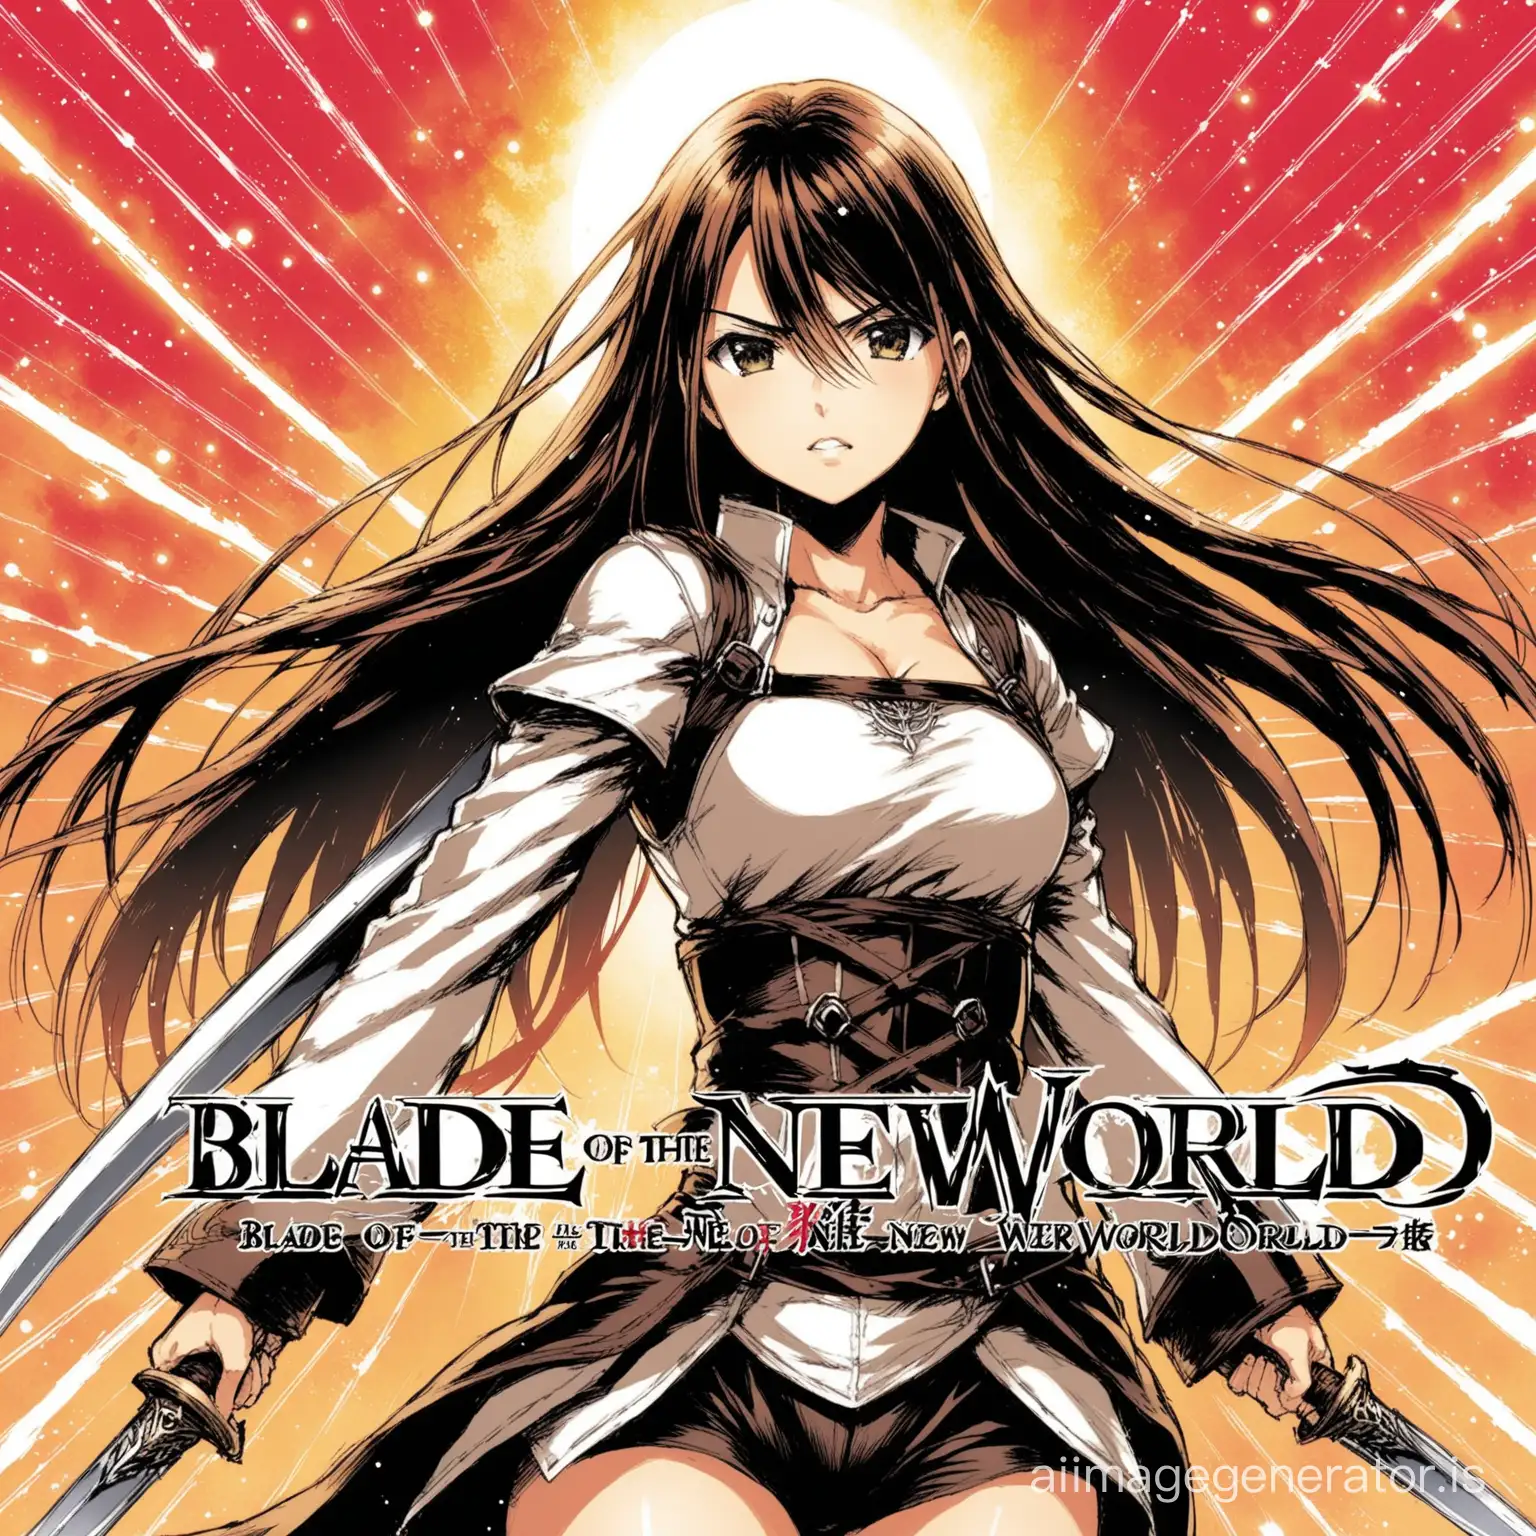 Manga cover, and title " Blade of  The New World"